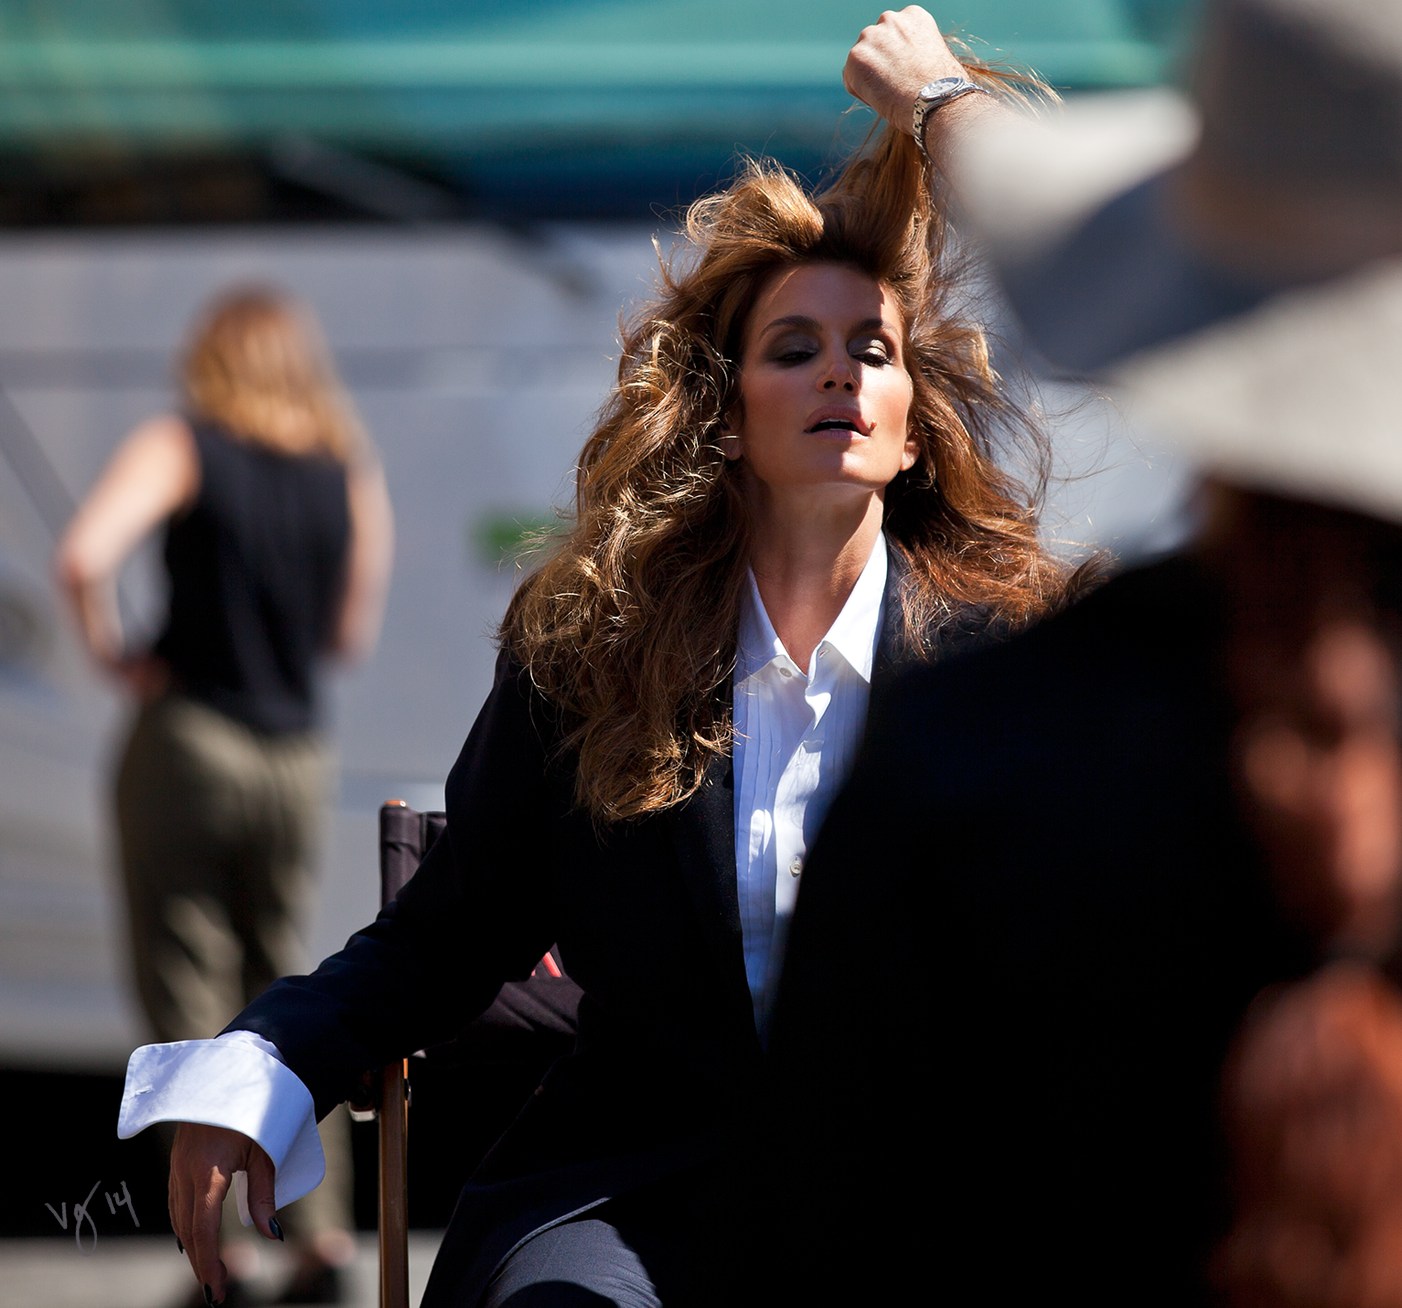 Behind the scenes with Cindy Crawford on Paramount Pictures' backlot  |  #VioletGrey, The Industry's Beauty Edit